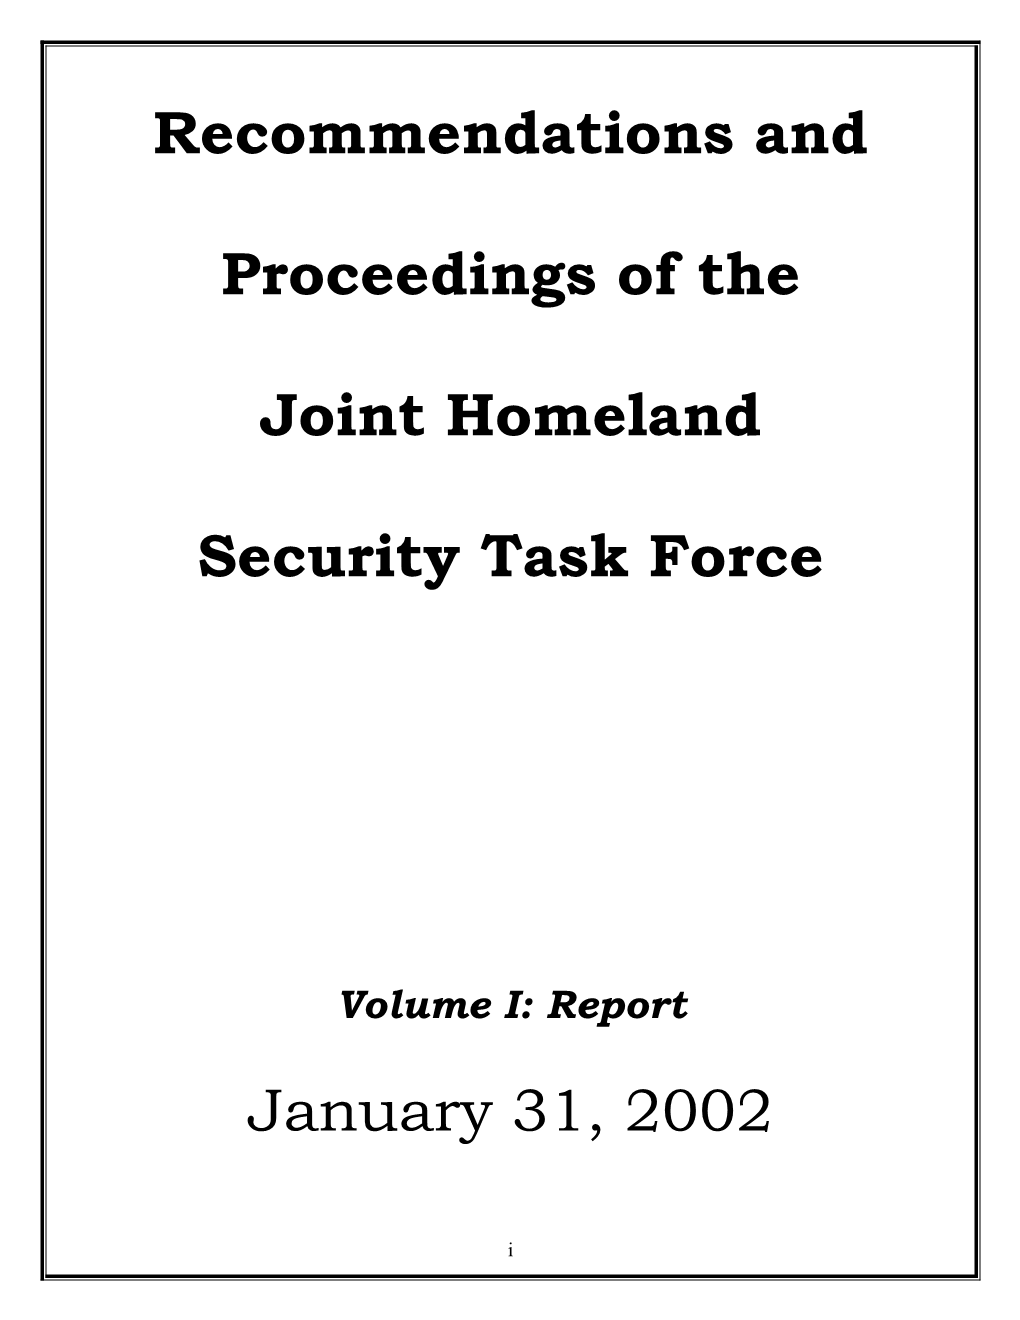 Recommendations and Proceedings of the Joint Homeland Security Task